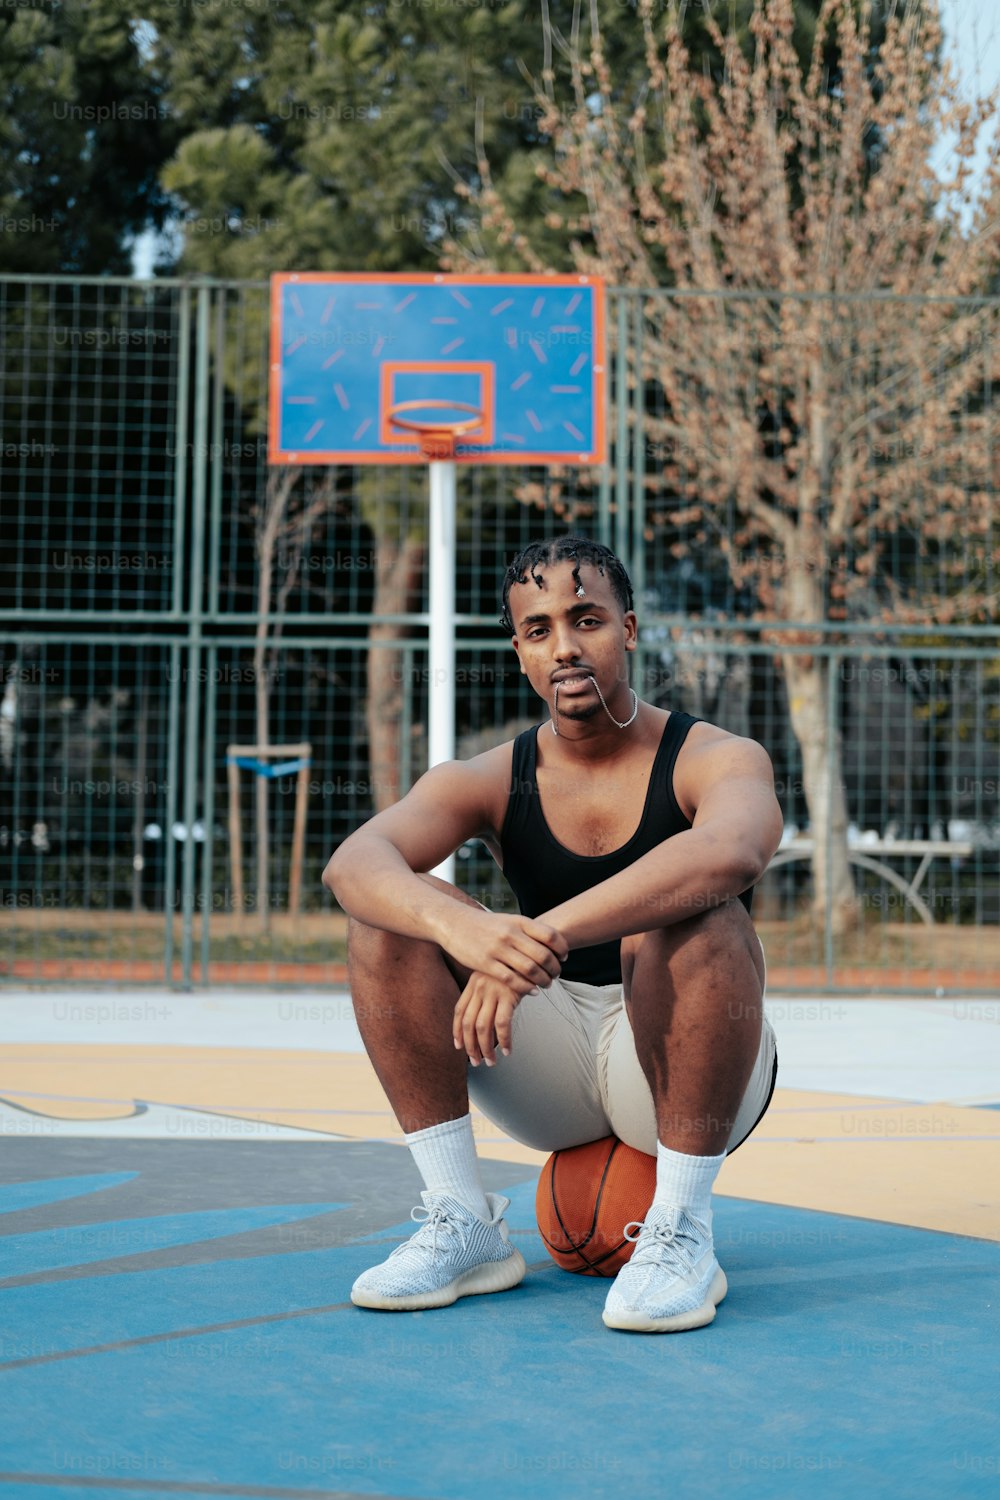 a man sitting on a basketball court holding a basketball